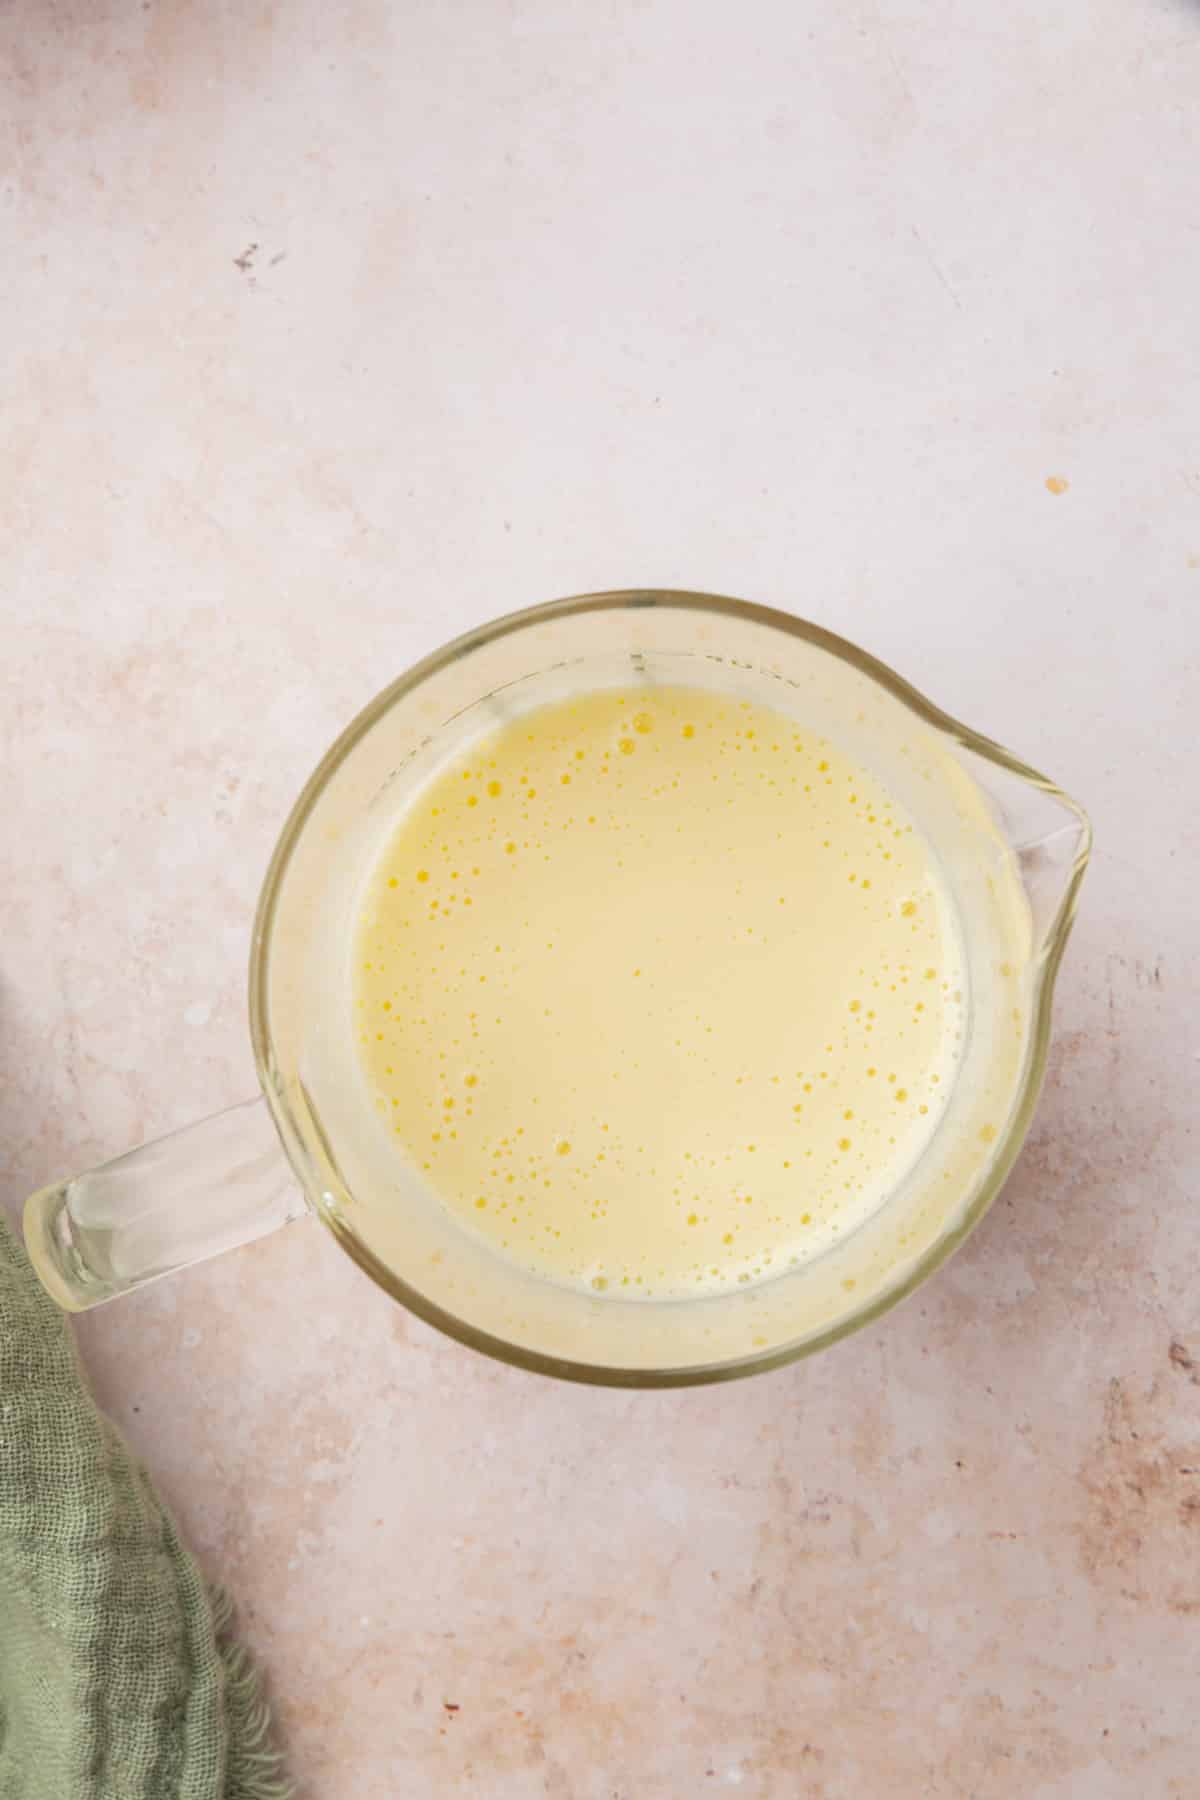 A glass measuring cup with a buttermilk and egg mixture in it.